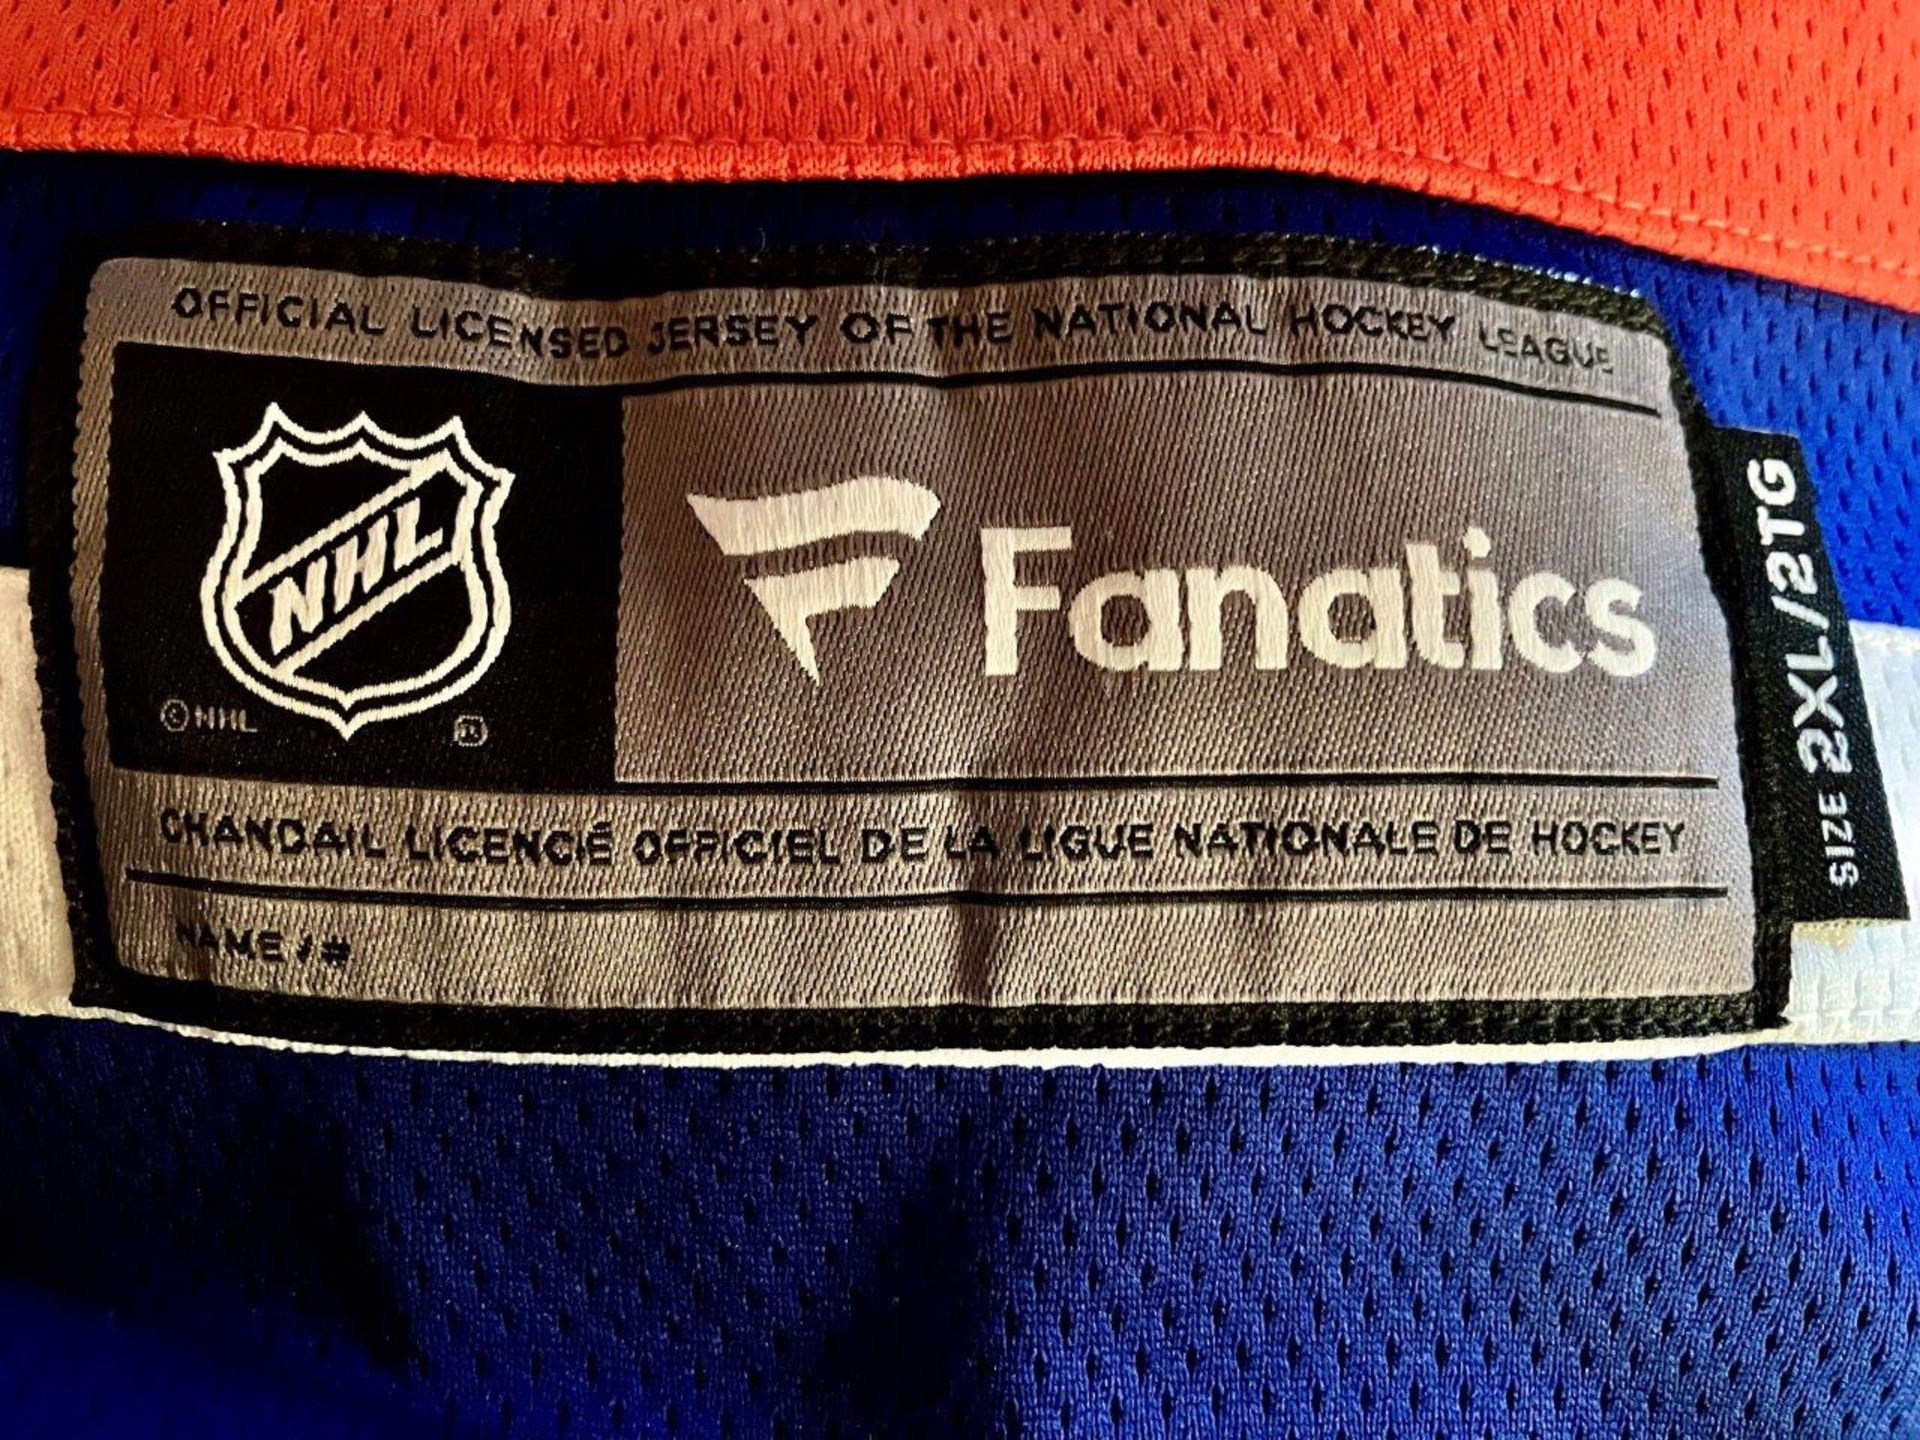 OILERS 2XL JERSEY - Image 3 of 3